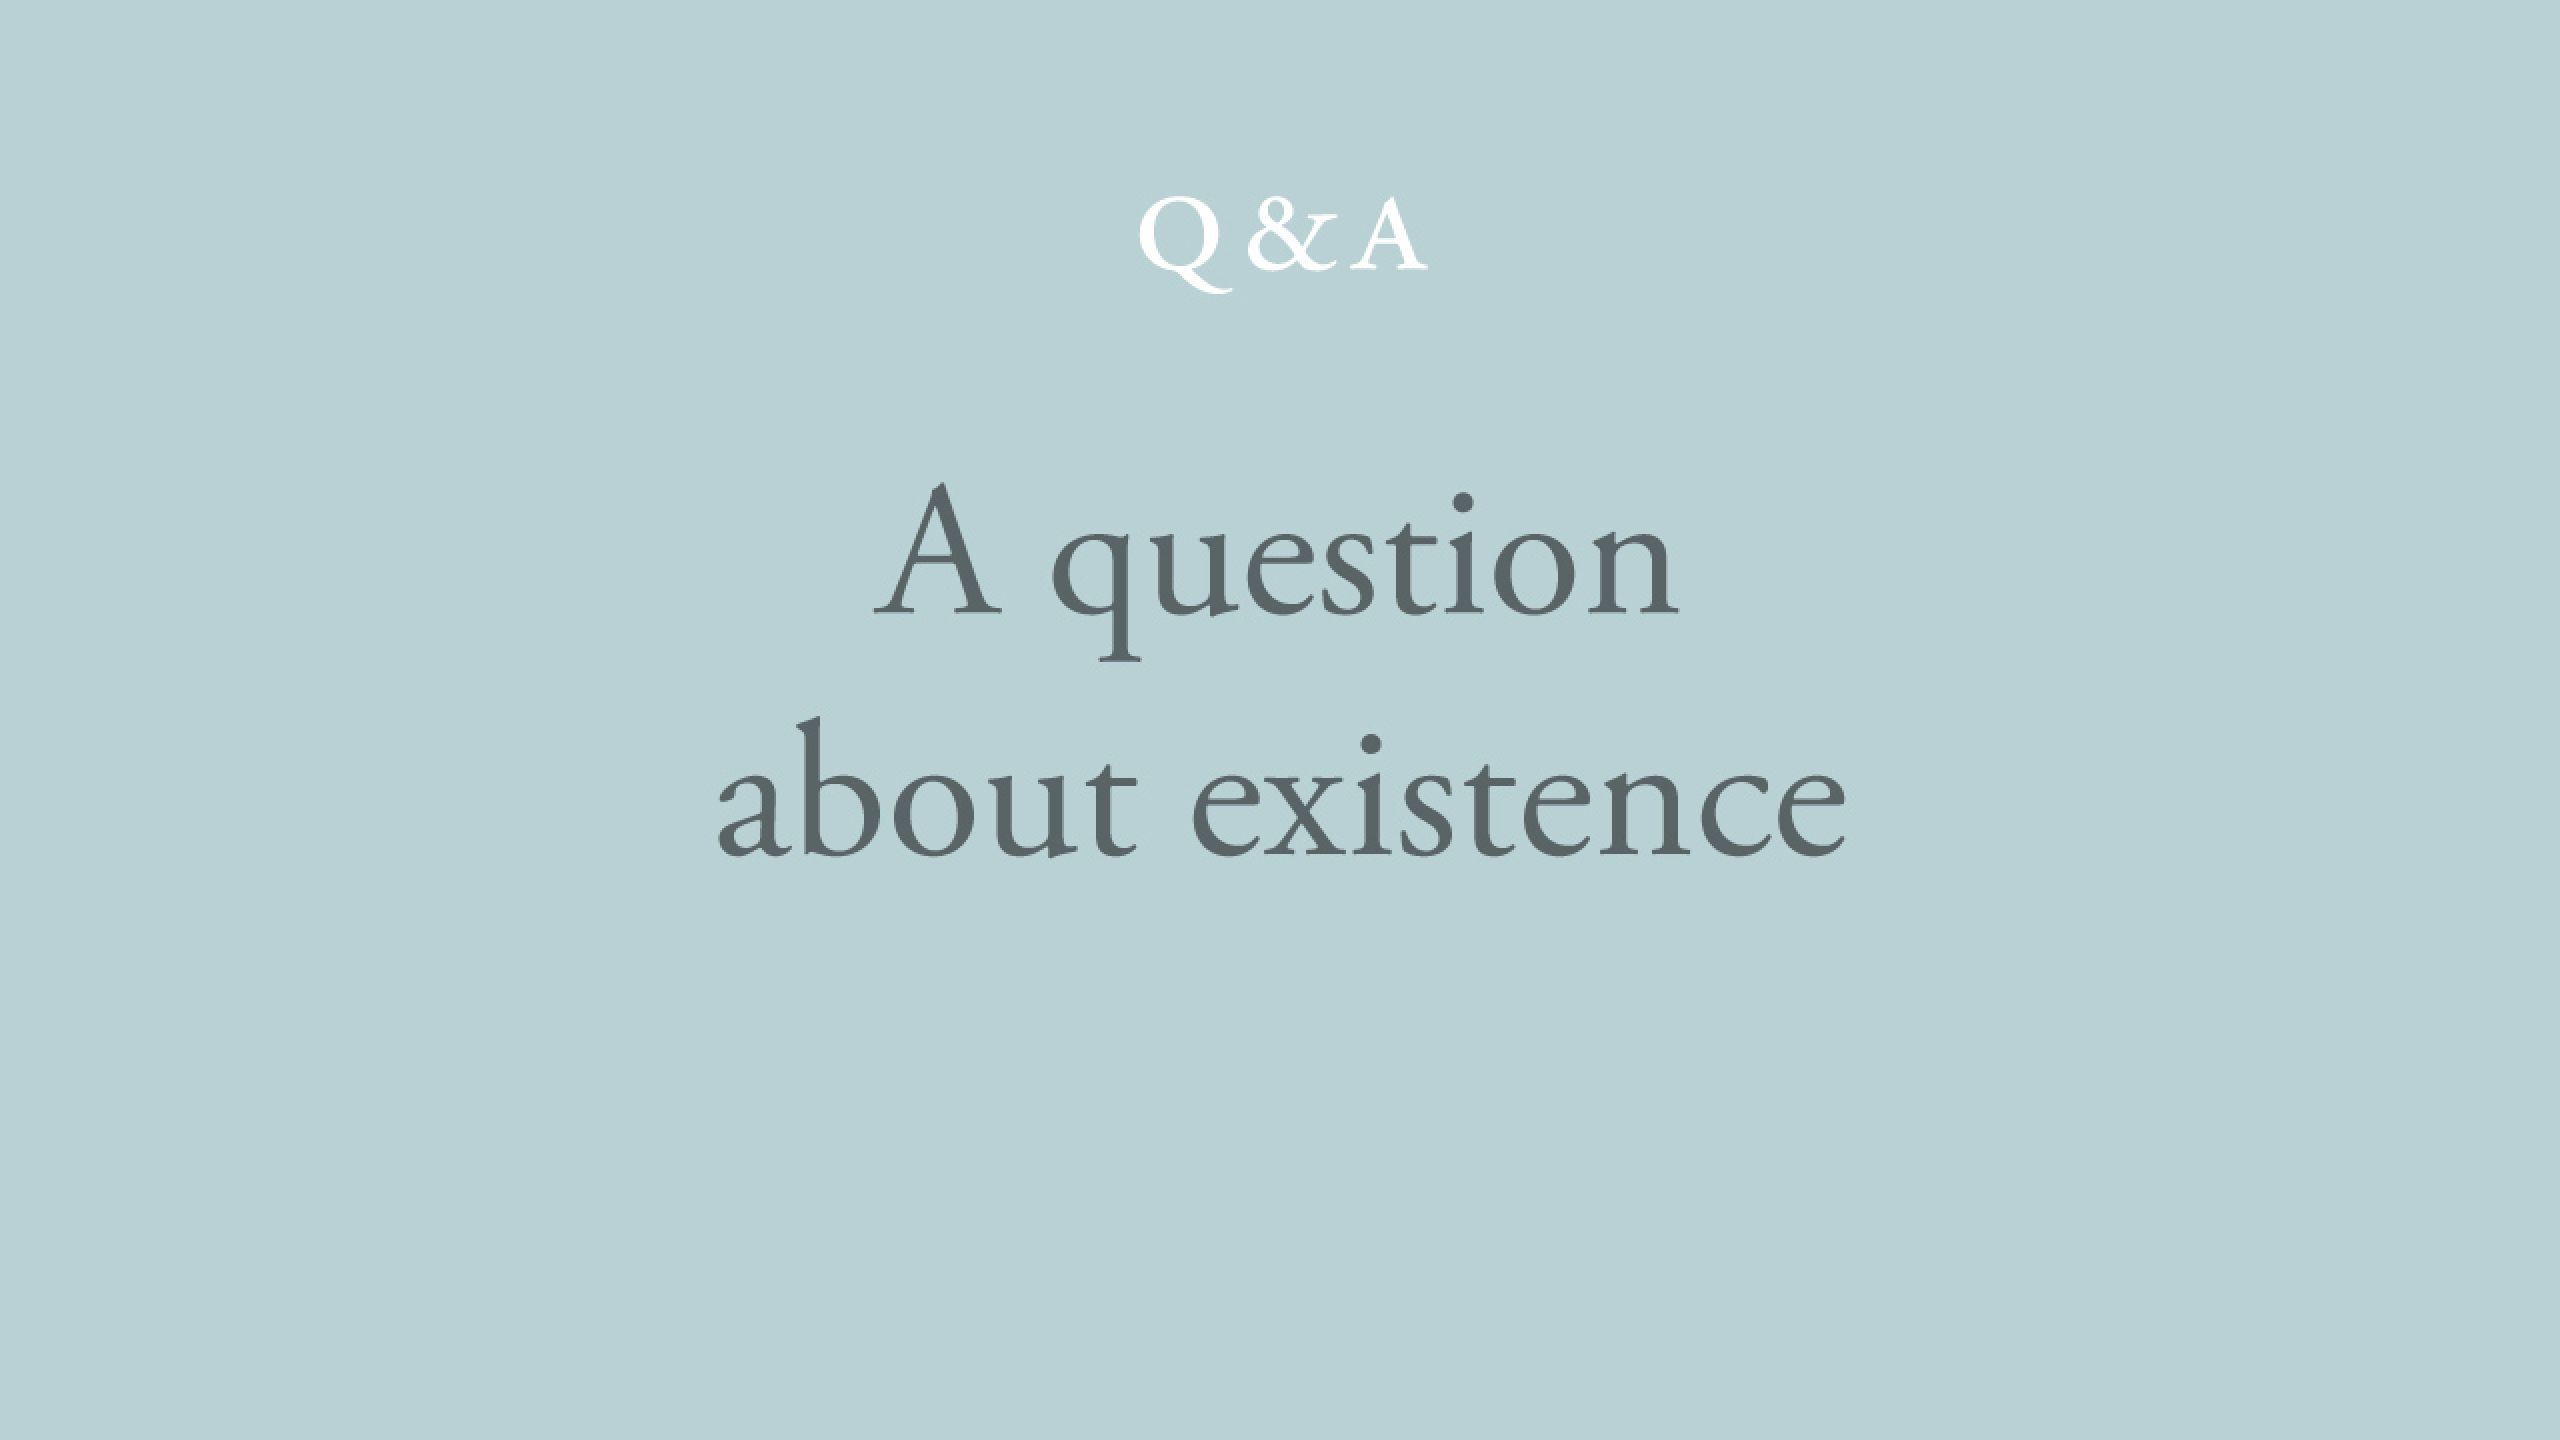 Is there existence without consciousness?